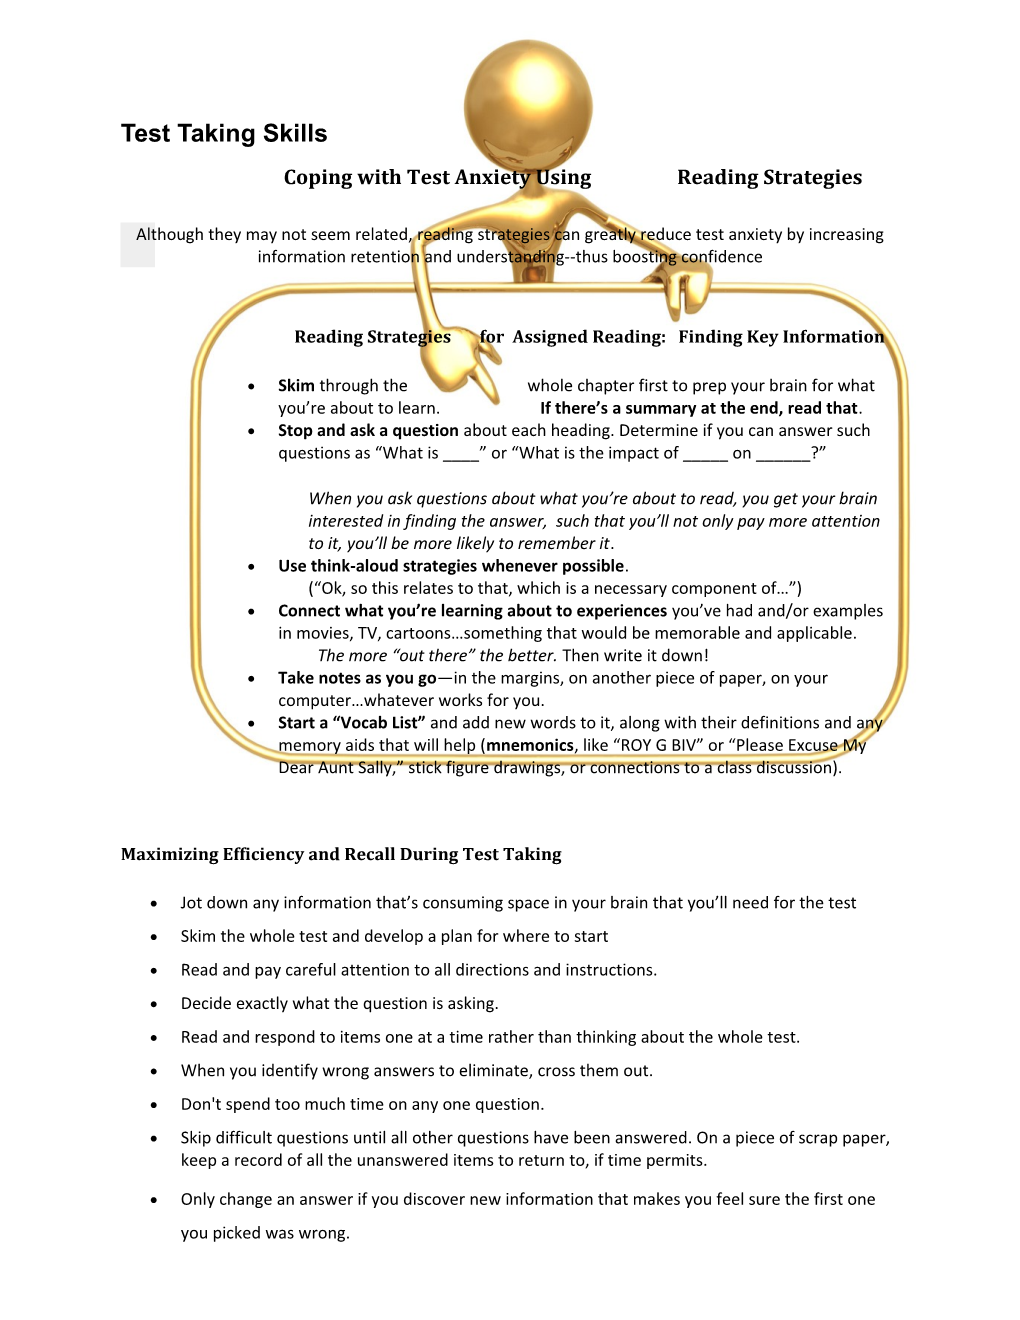 Coping with Test Anxiety Using Reading Strategies